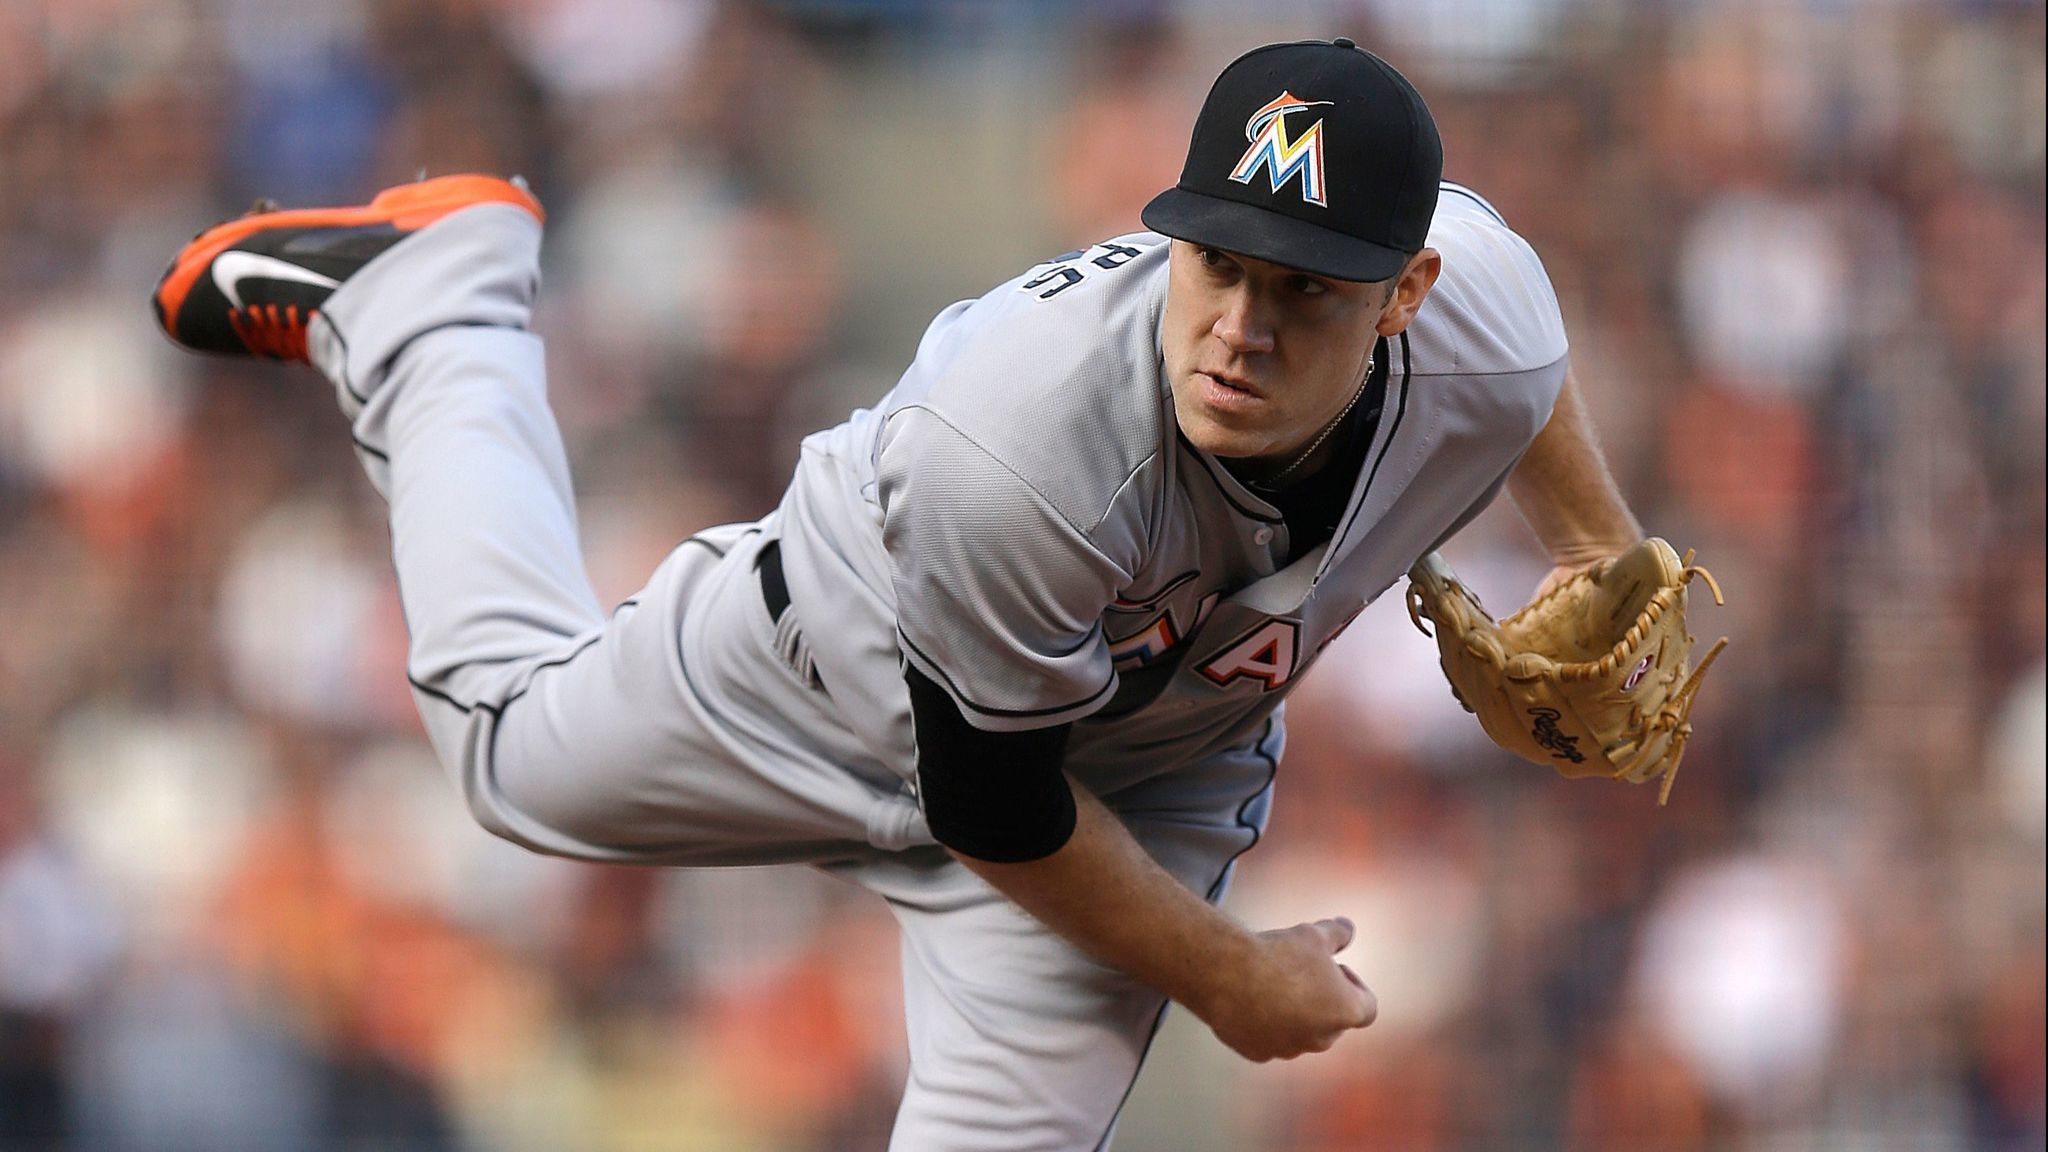 Marlins trade reliever David Phelps to Mariners for four prospects